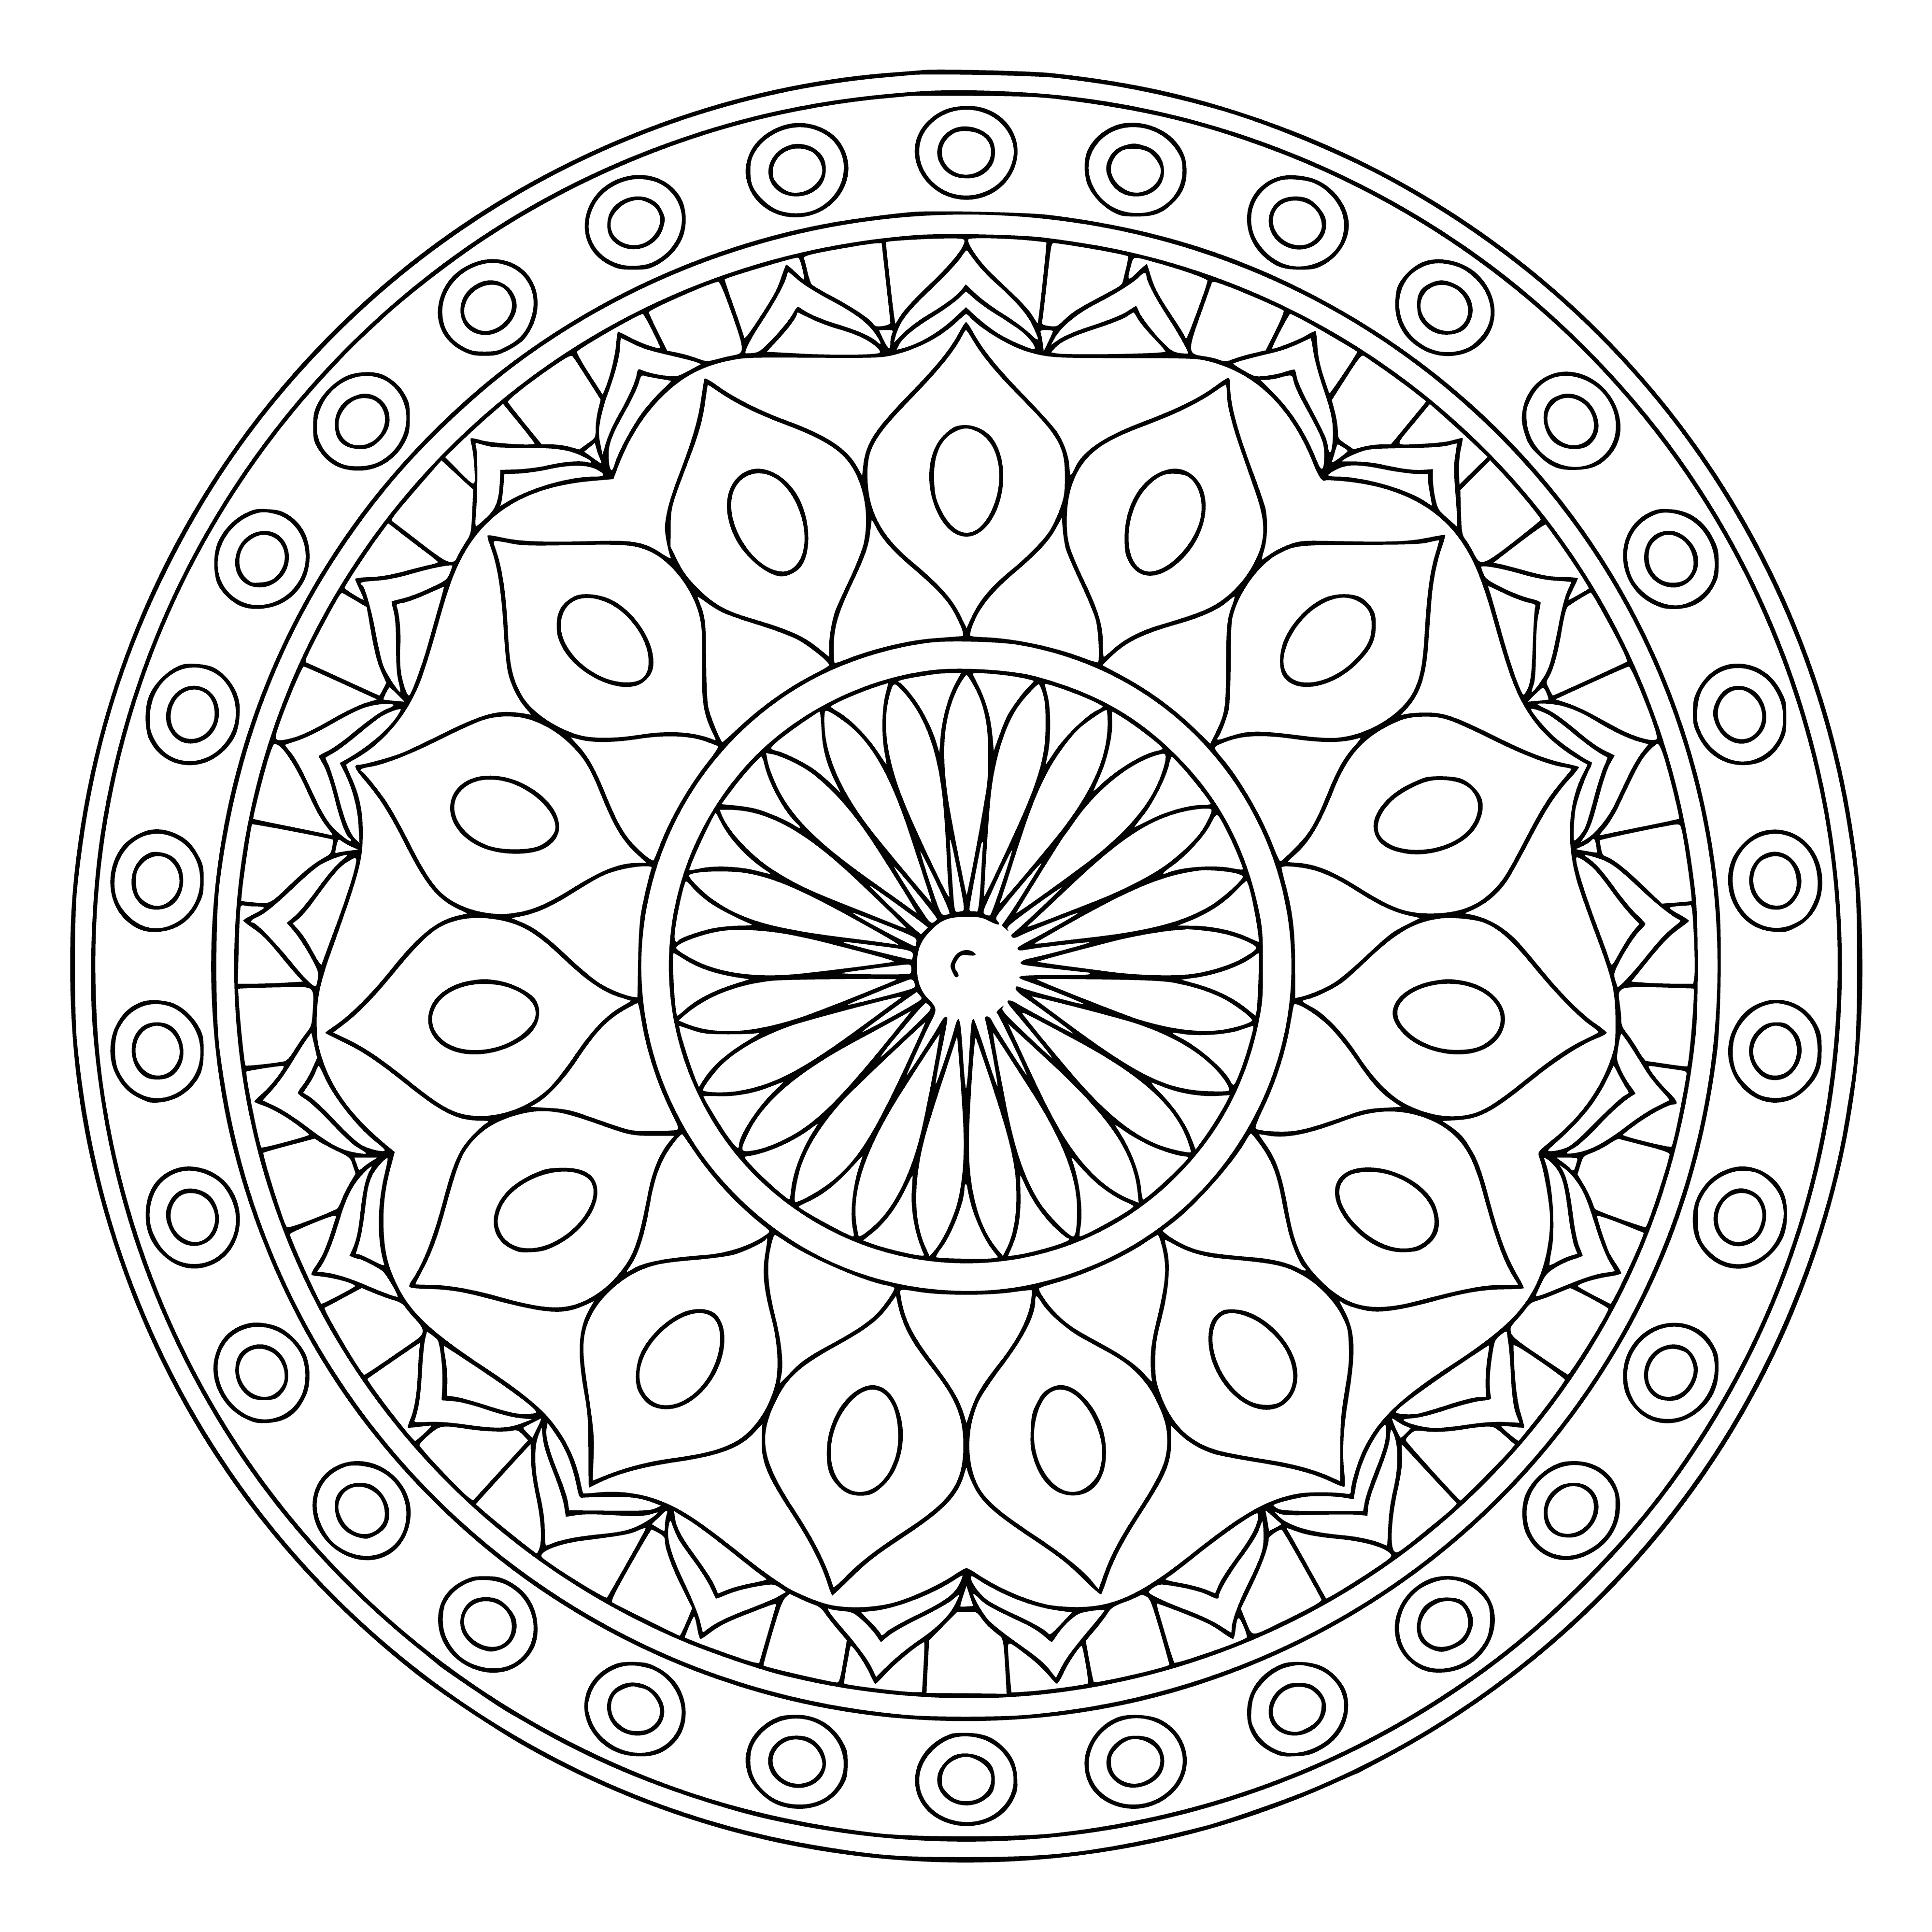 coloring page: Flower mandala has petals in shades of pink and a yellow center; smaller flowers with intricate designs throughout. #Mandala #Flower #RadiantColors